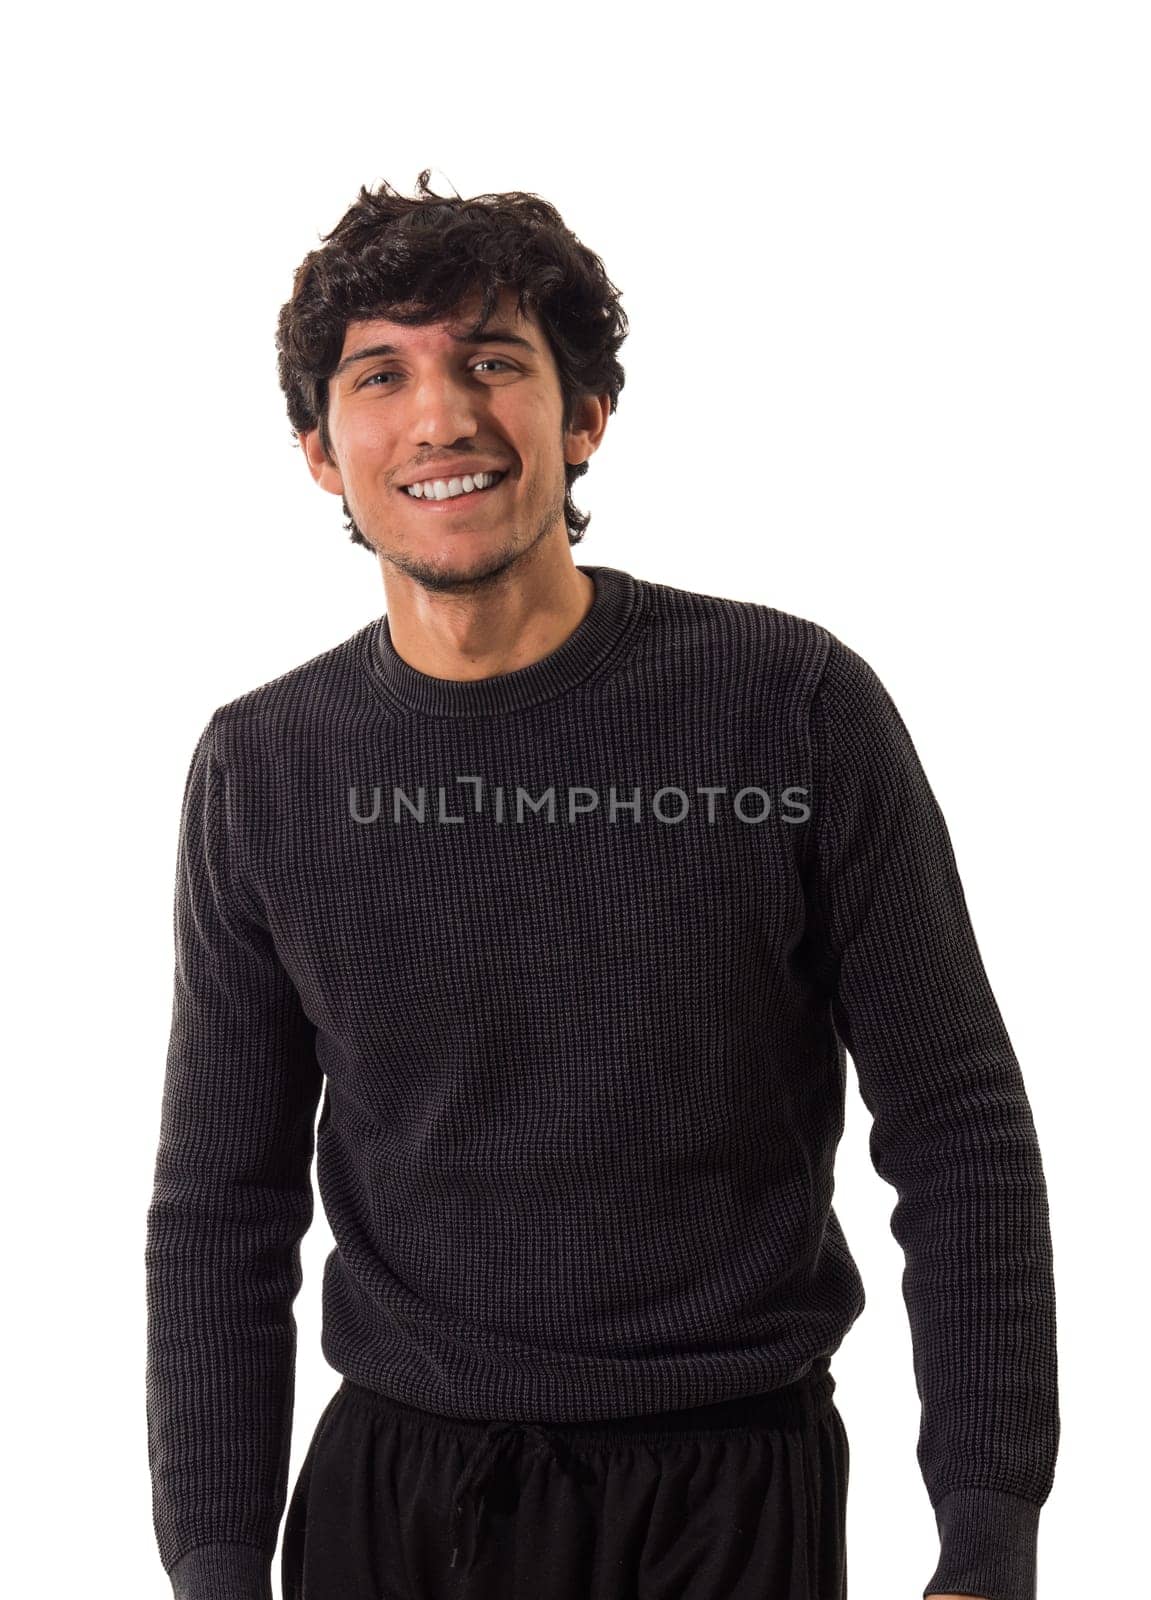 A man in a black sweater and black pants by artofphoto